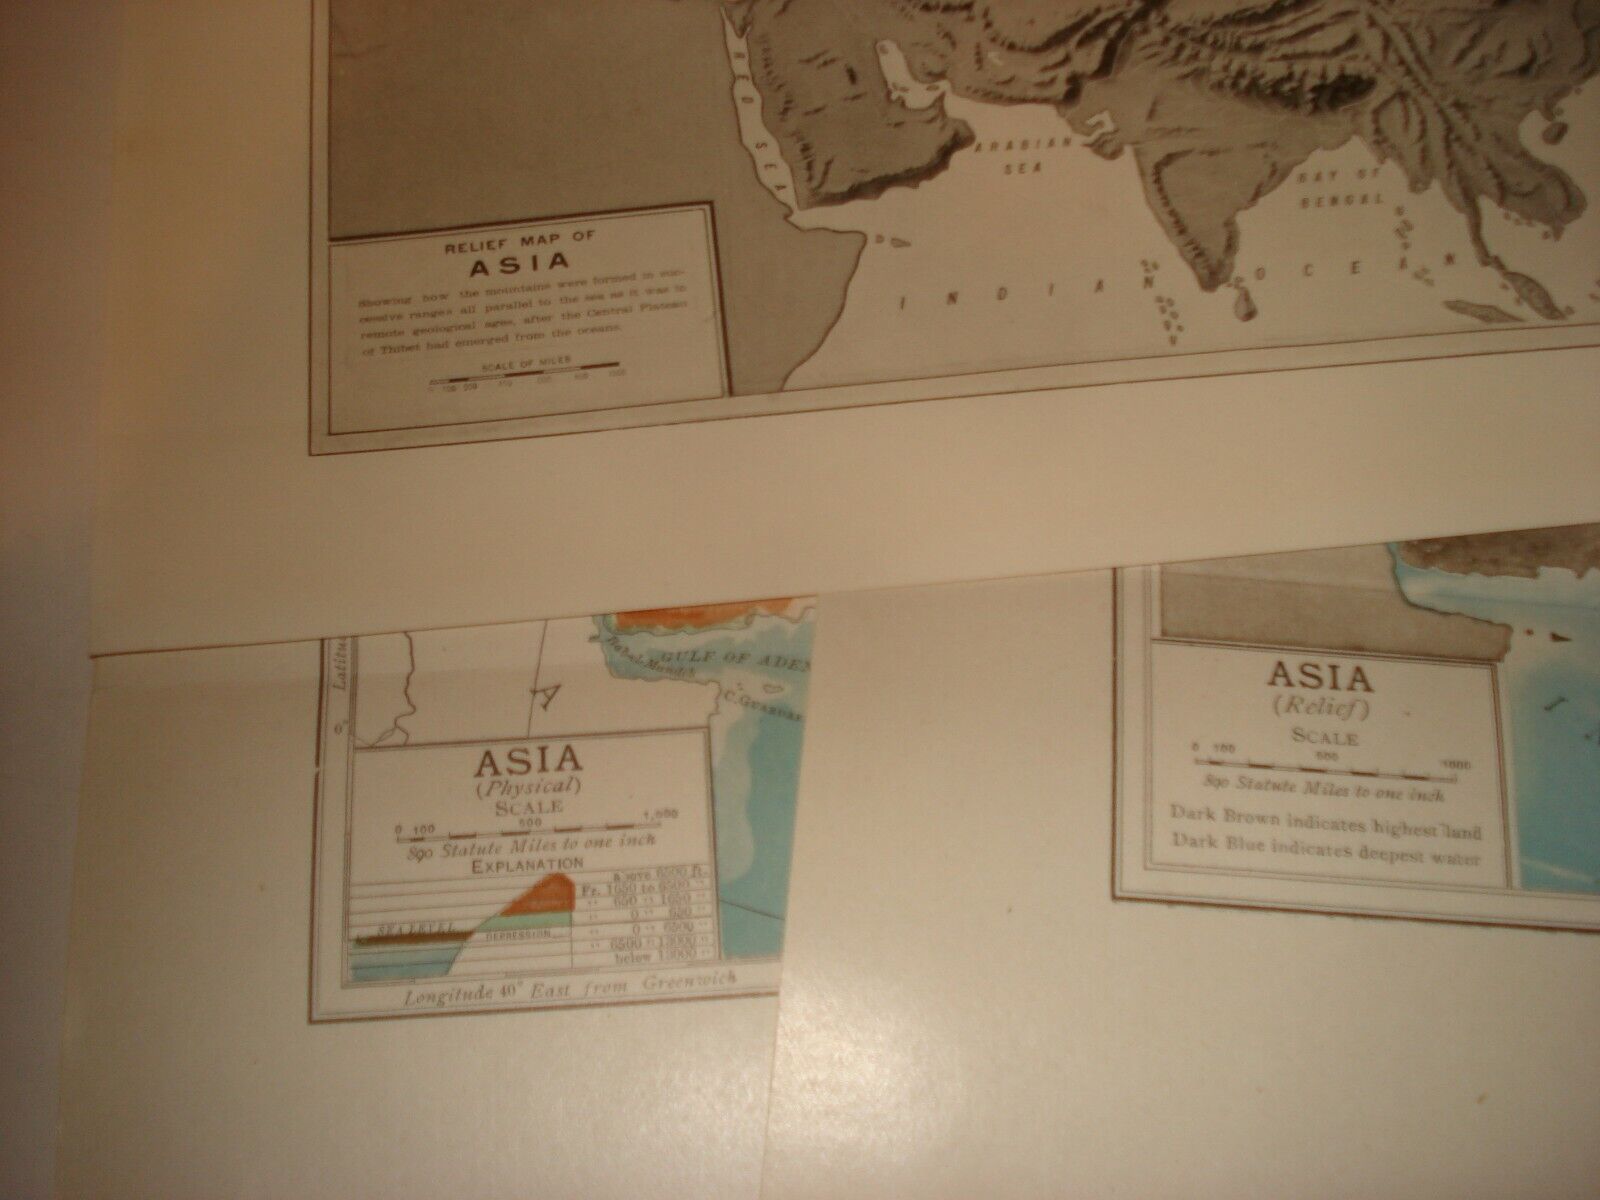 Lot of 5 Antique Maps 1903 1904  Asia Colorful Map Relief Rand McNally Без бренда - фотография #10